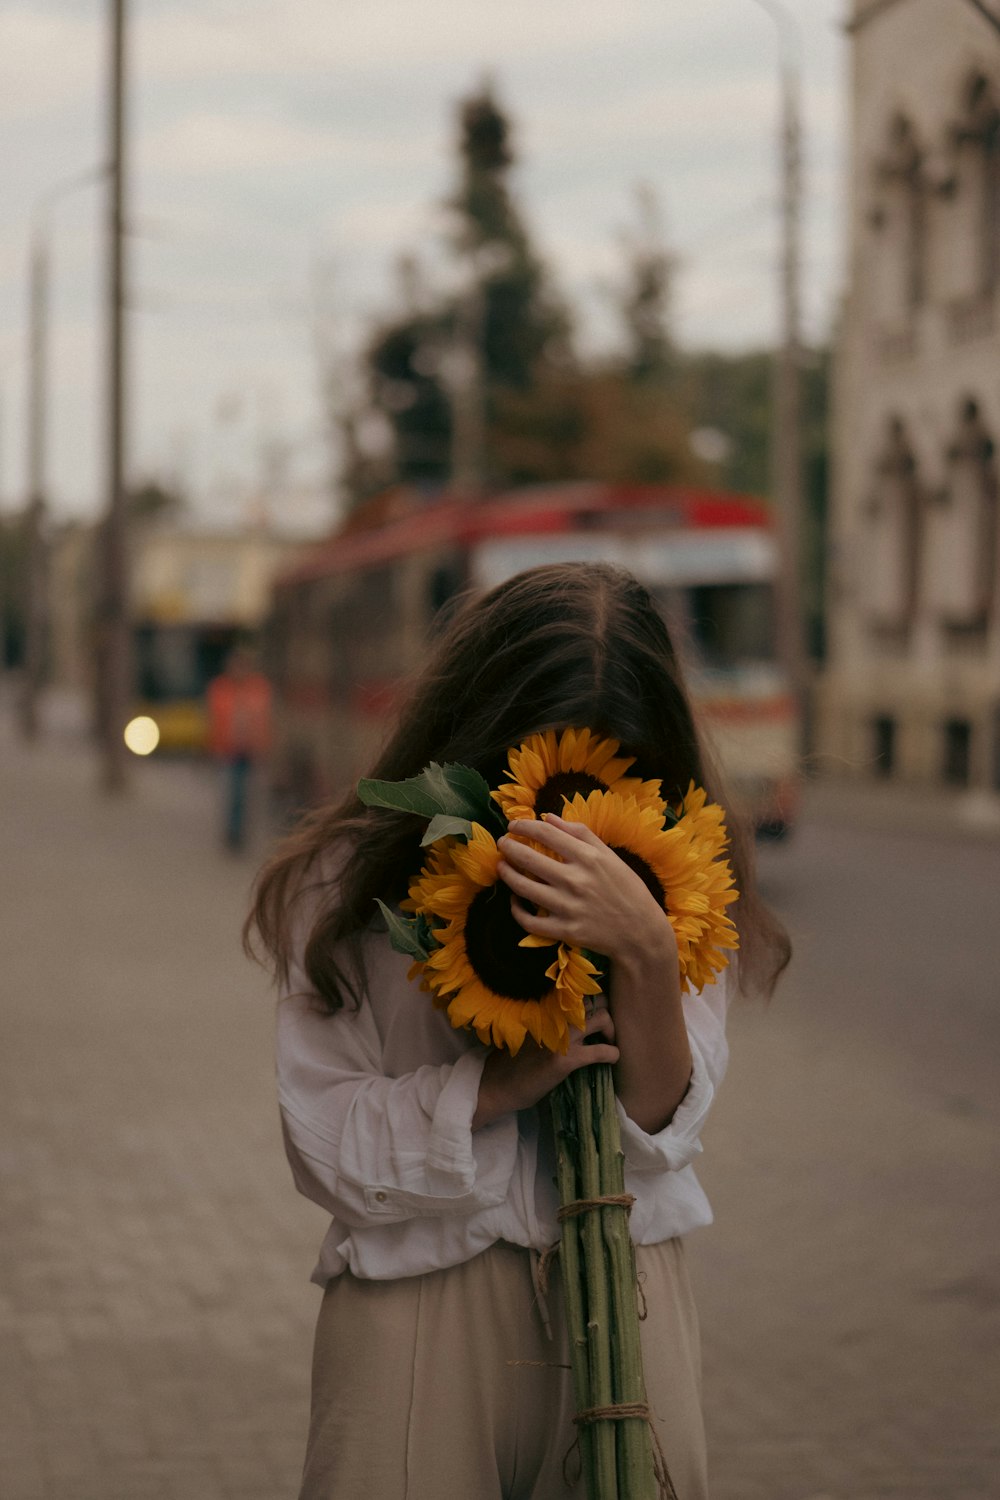 a woman holding a bouquet of sunflowers in her hands